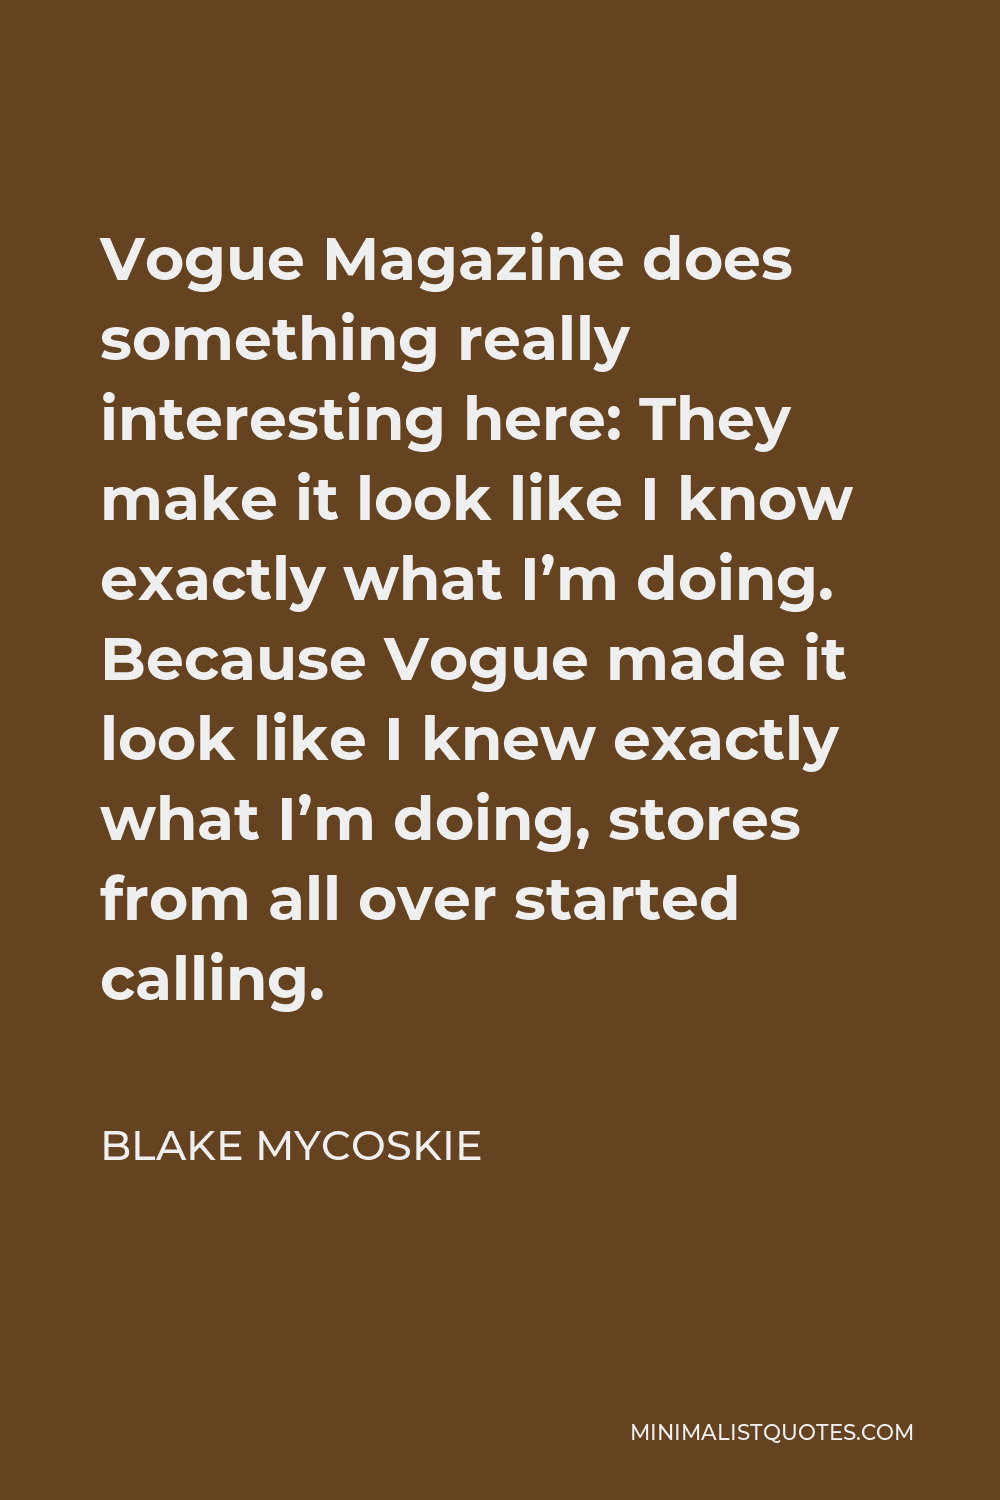 Blake Mycoskie Quote - Vogue Magazine does something really interesting here: They make it look like I know exactly what I’m doing. Because Vogue made it look like I knew exactly what I’m doing, stores from all over started calling.